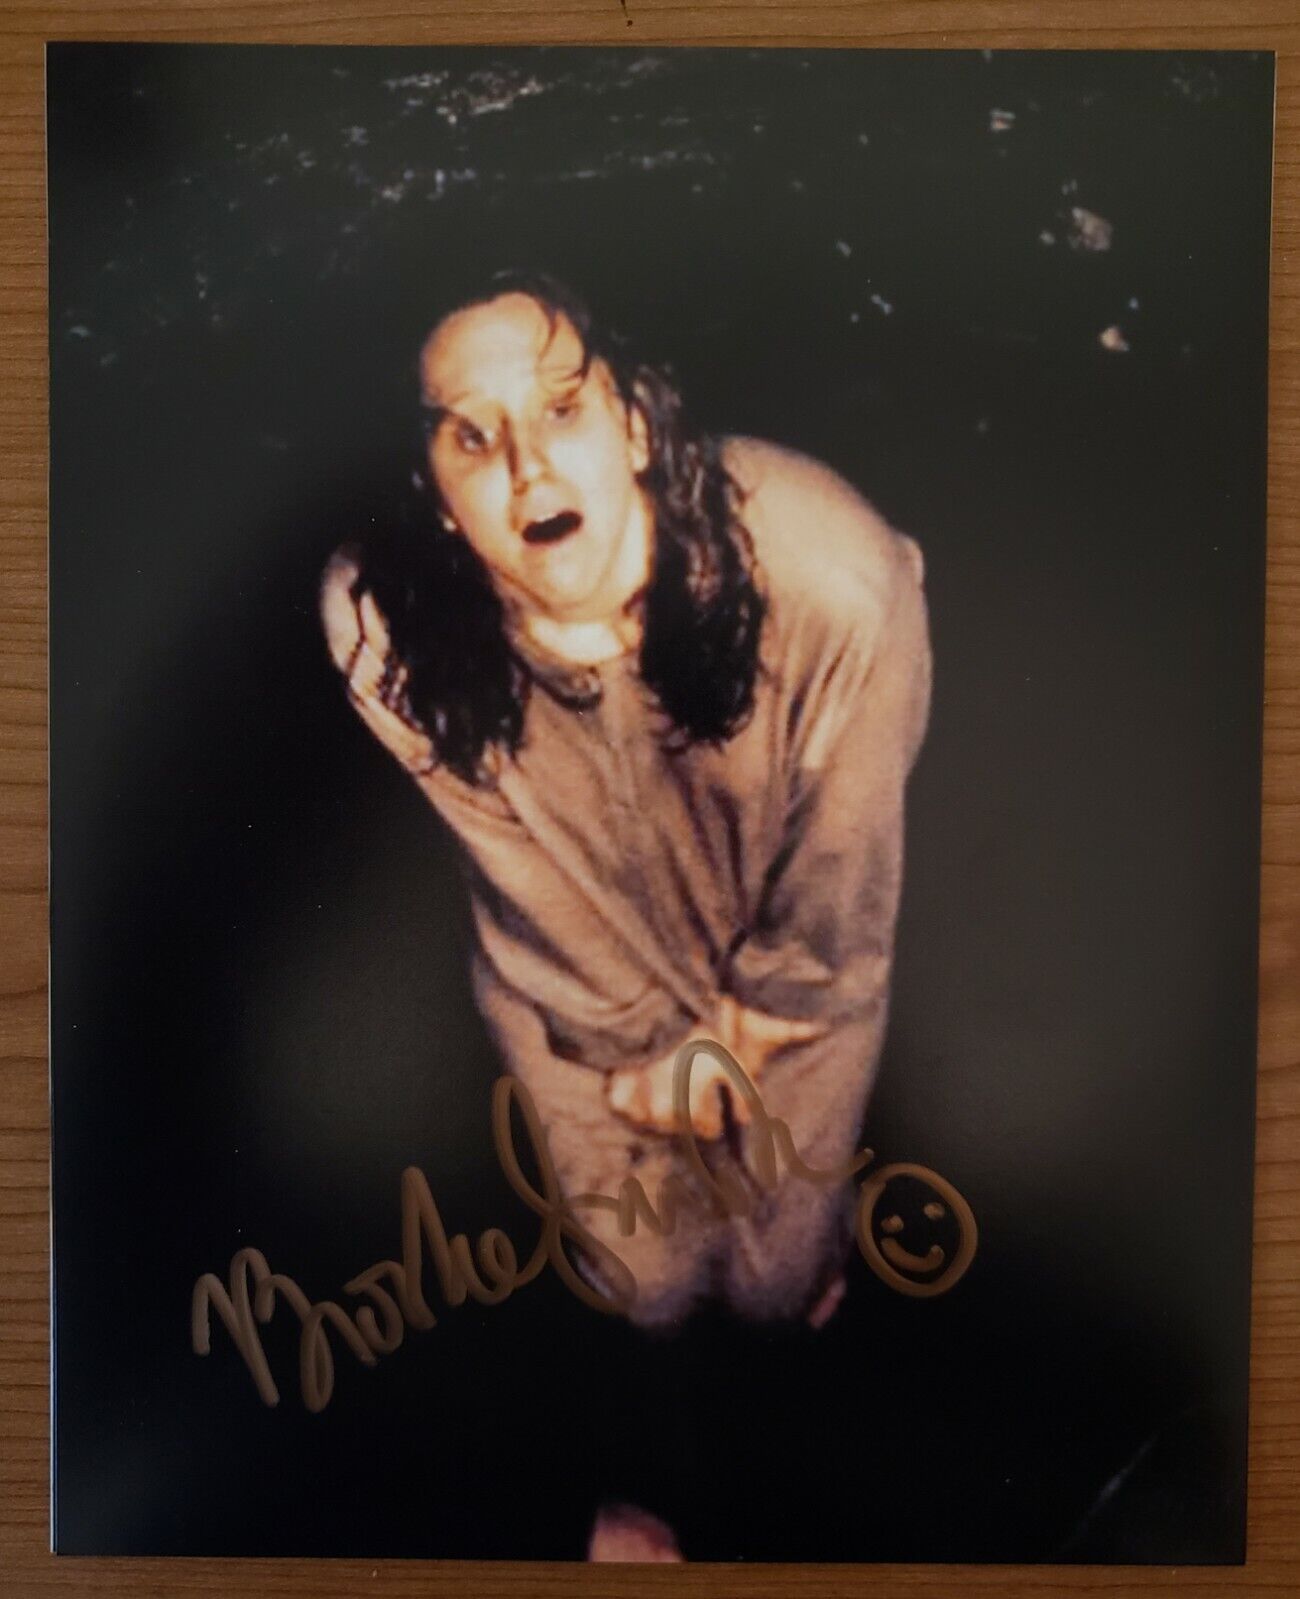 8X10 Autographed by Brooke Smith of The Silence of the Lambs